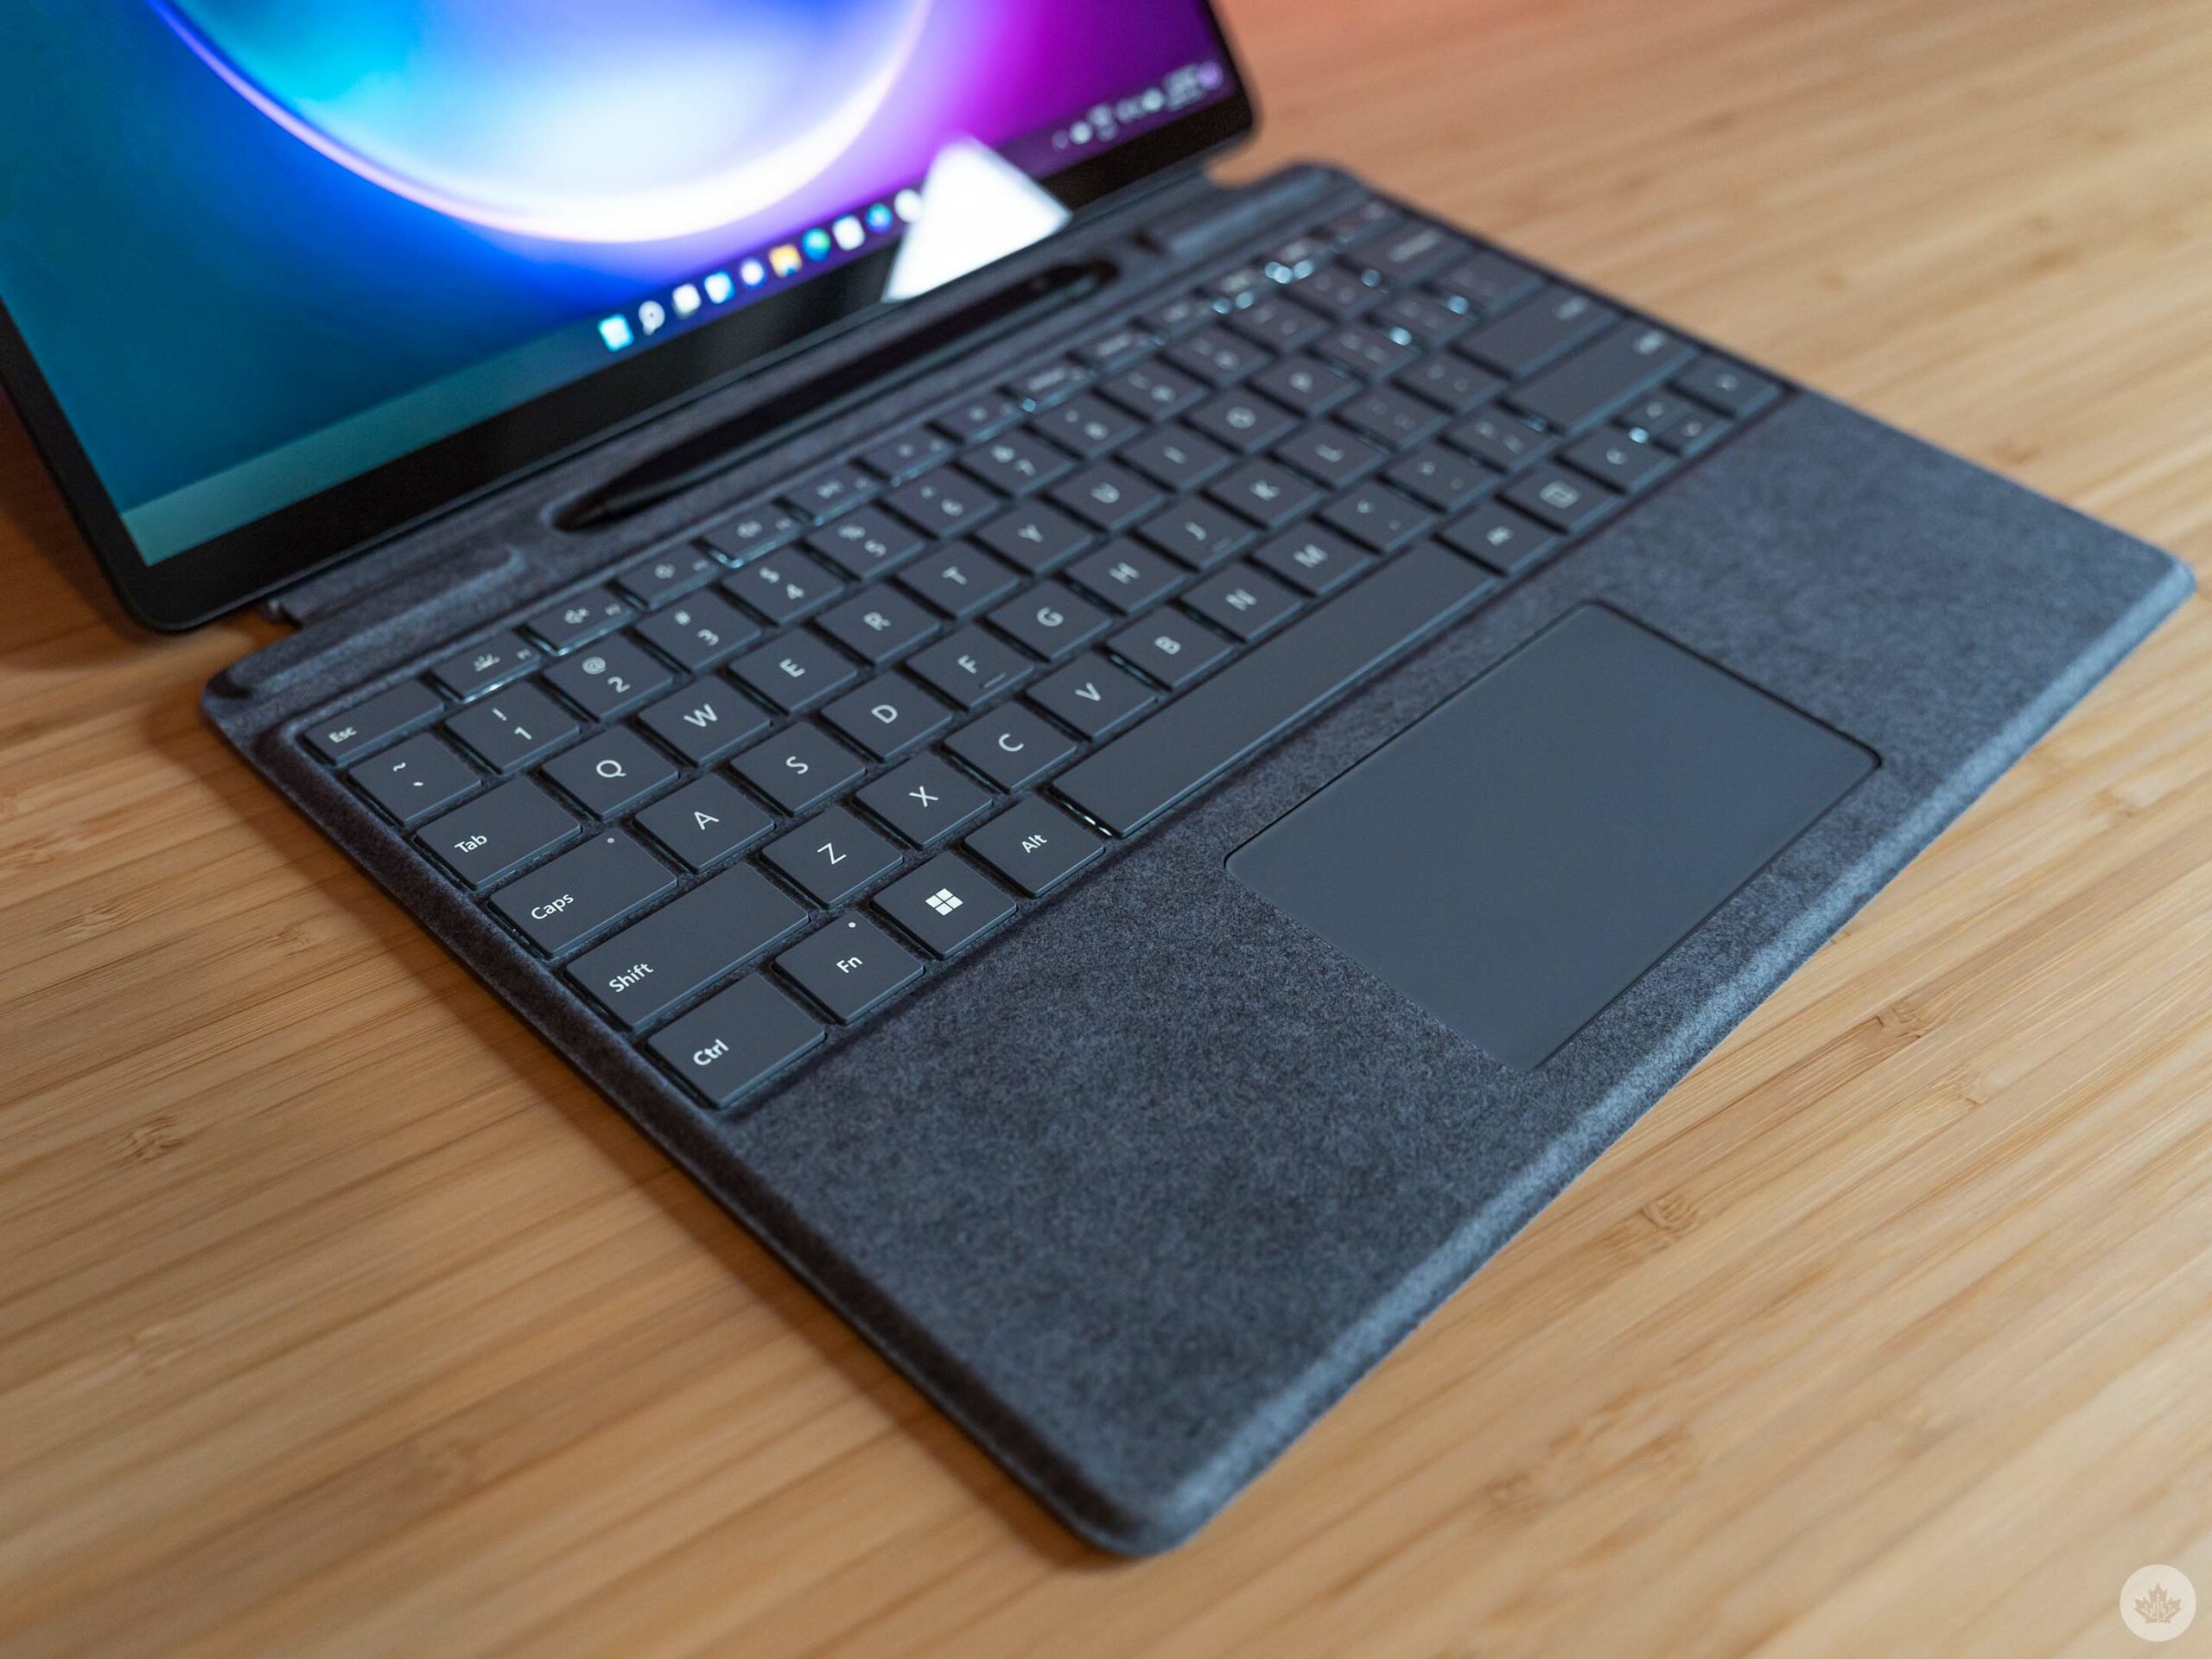 Microsoft Surface Pro 8 is a strong 2-in-1 with too many hidden